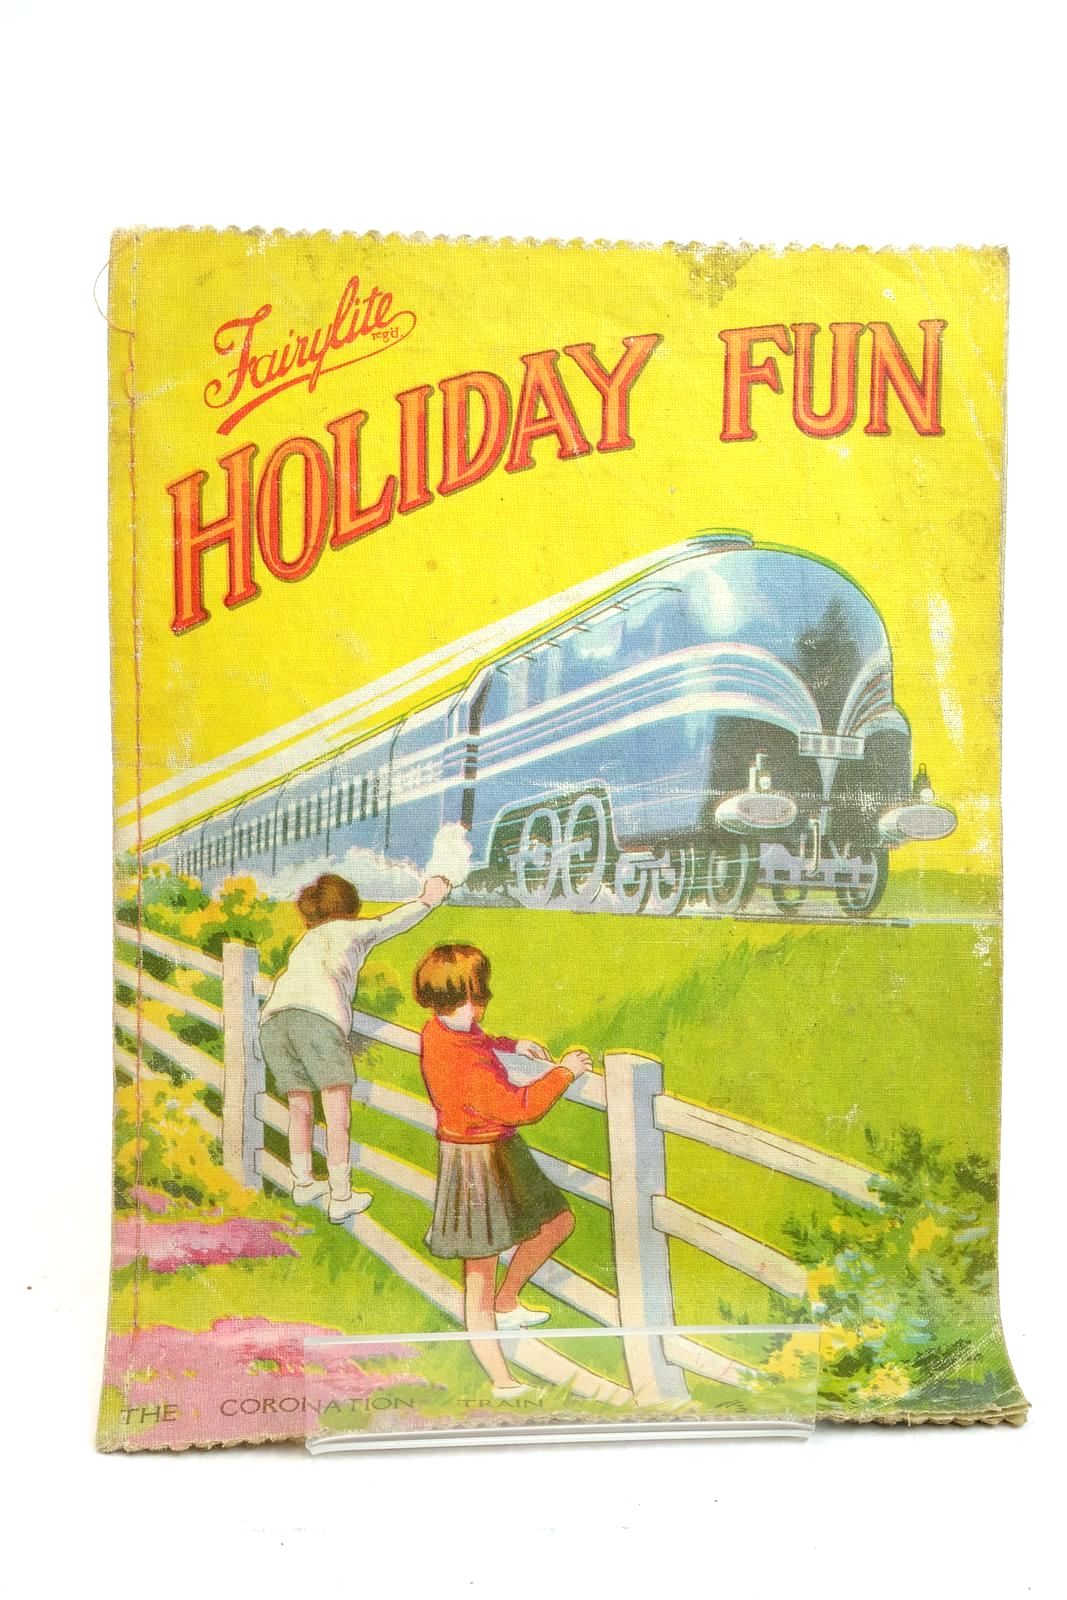 Photo of HOLIDAY FUN- Stock Number: 1321151